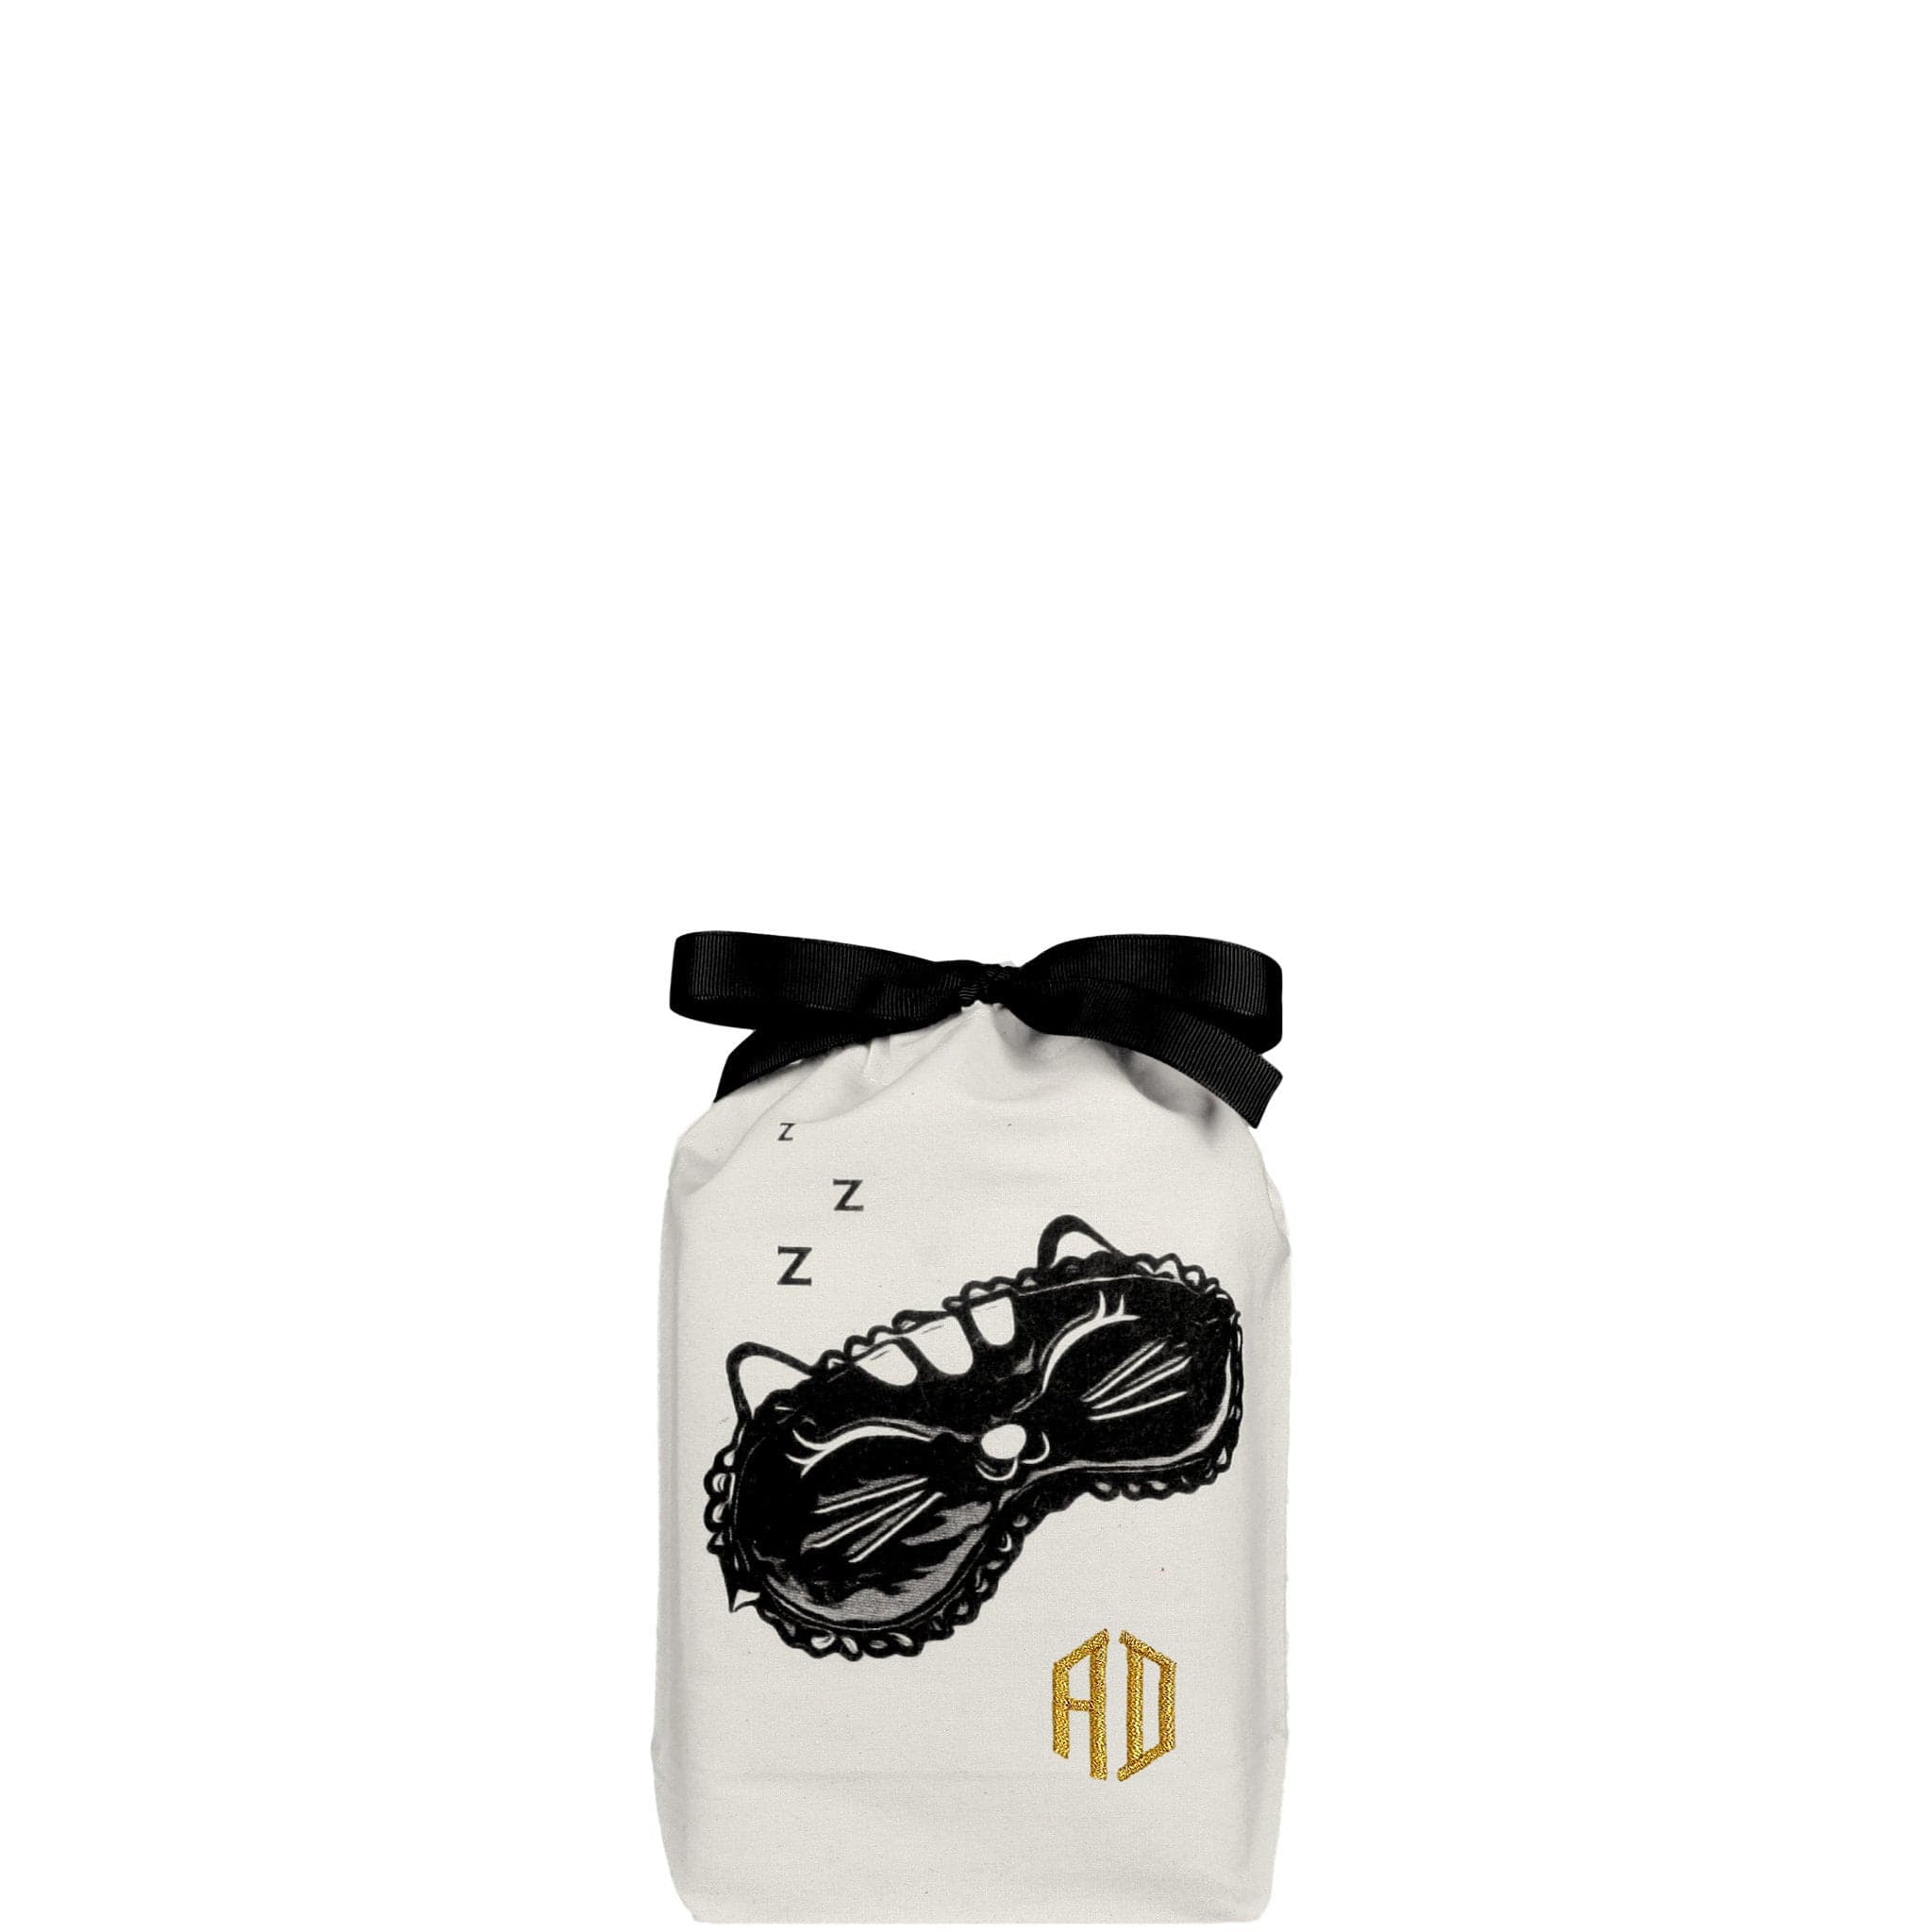 Mask bag for your sleep mask with "AD" monogrammed on the bottom right. 